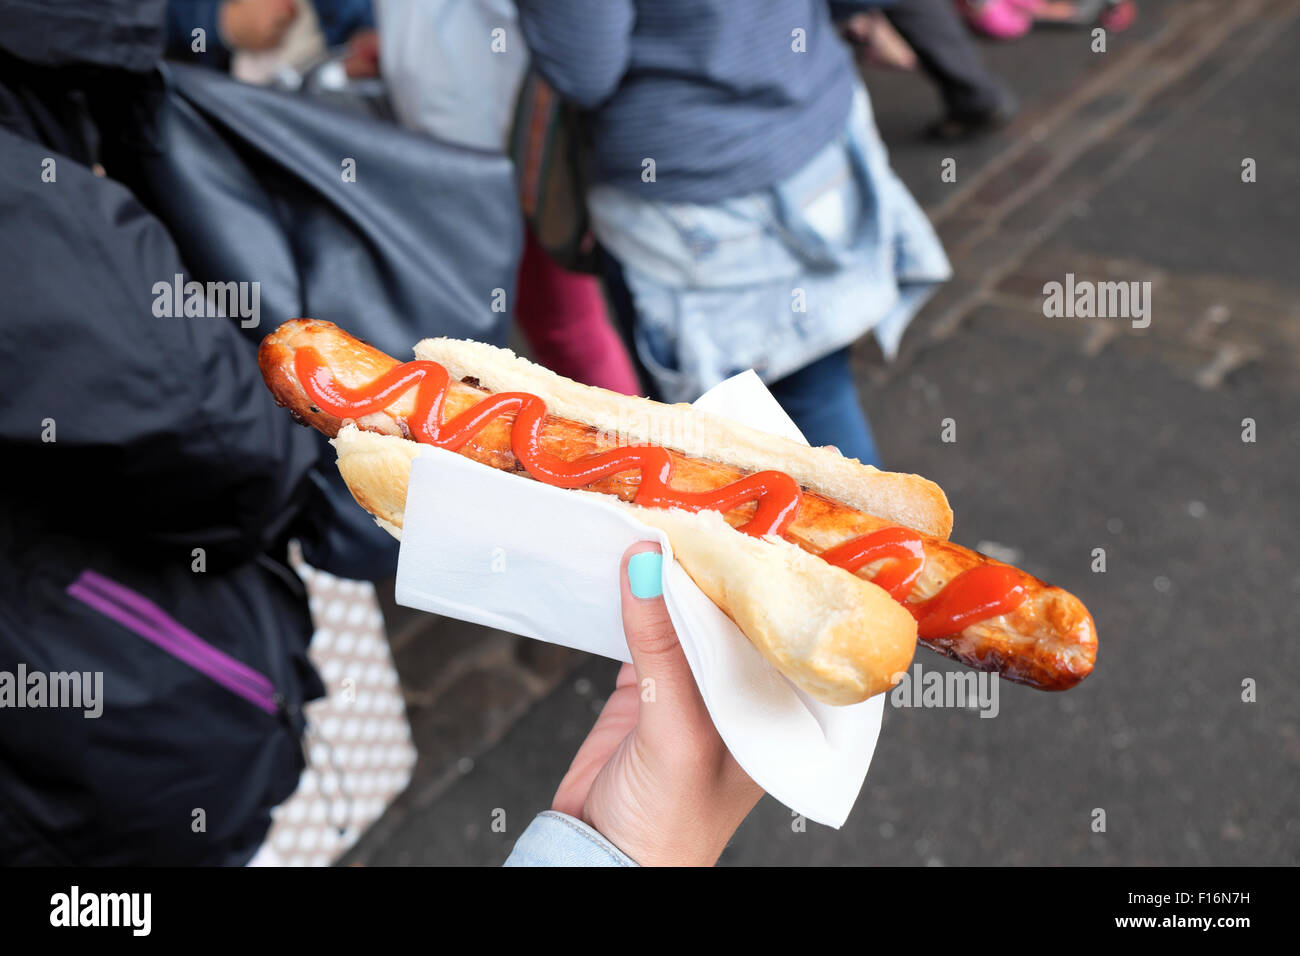 Closeup view of a girl with blue nail varnish eating holding a hotdog in a bun with ketchup in Borough Market South London UK  KATHY DEWITT Stock Photo